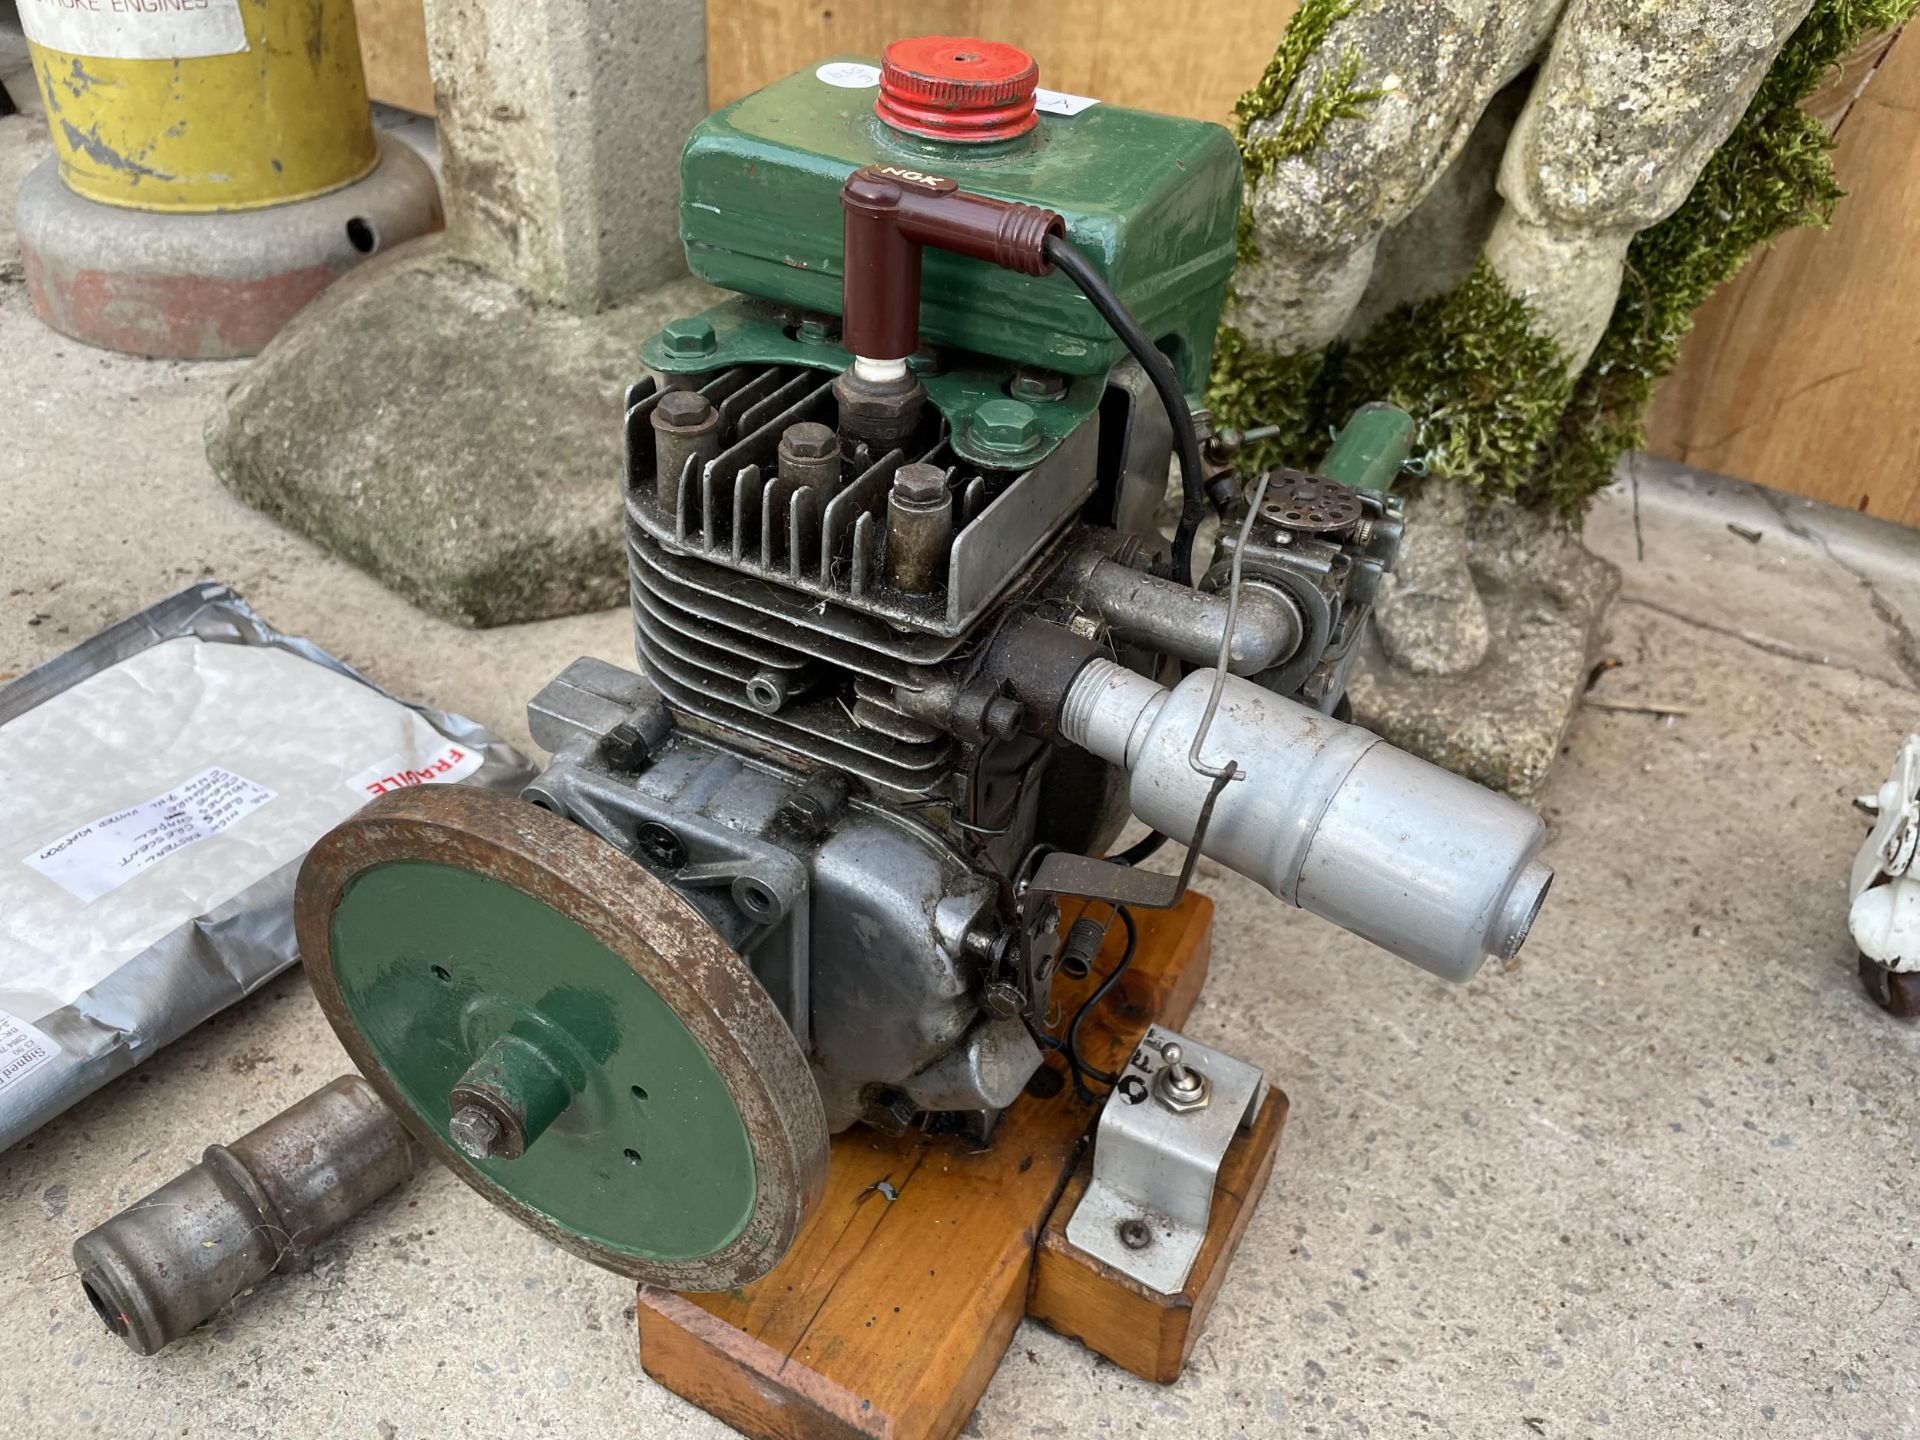 A VILLIERS PETROL STATIONARY ENGINE - Image 2 of 4